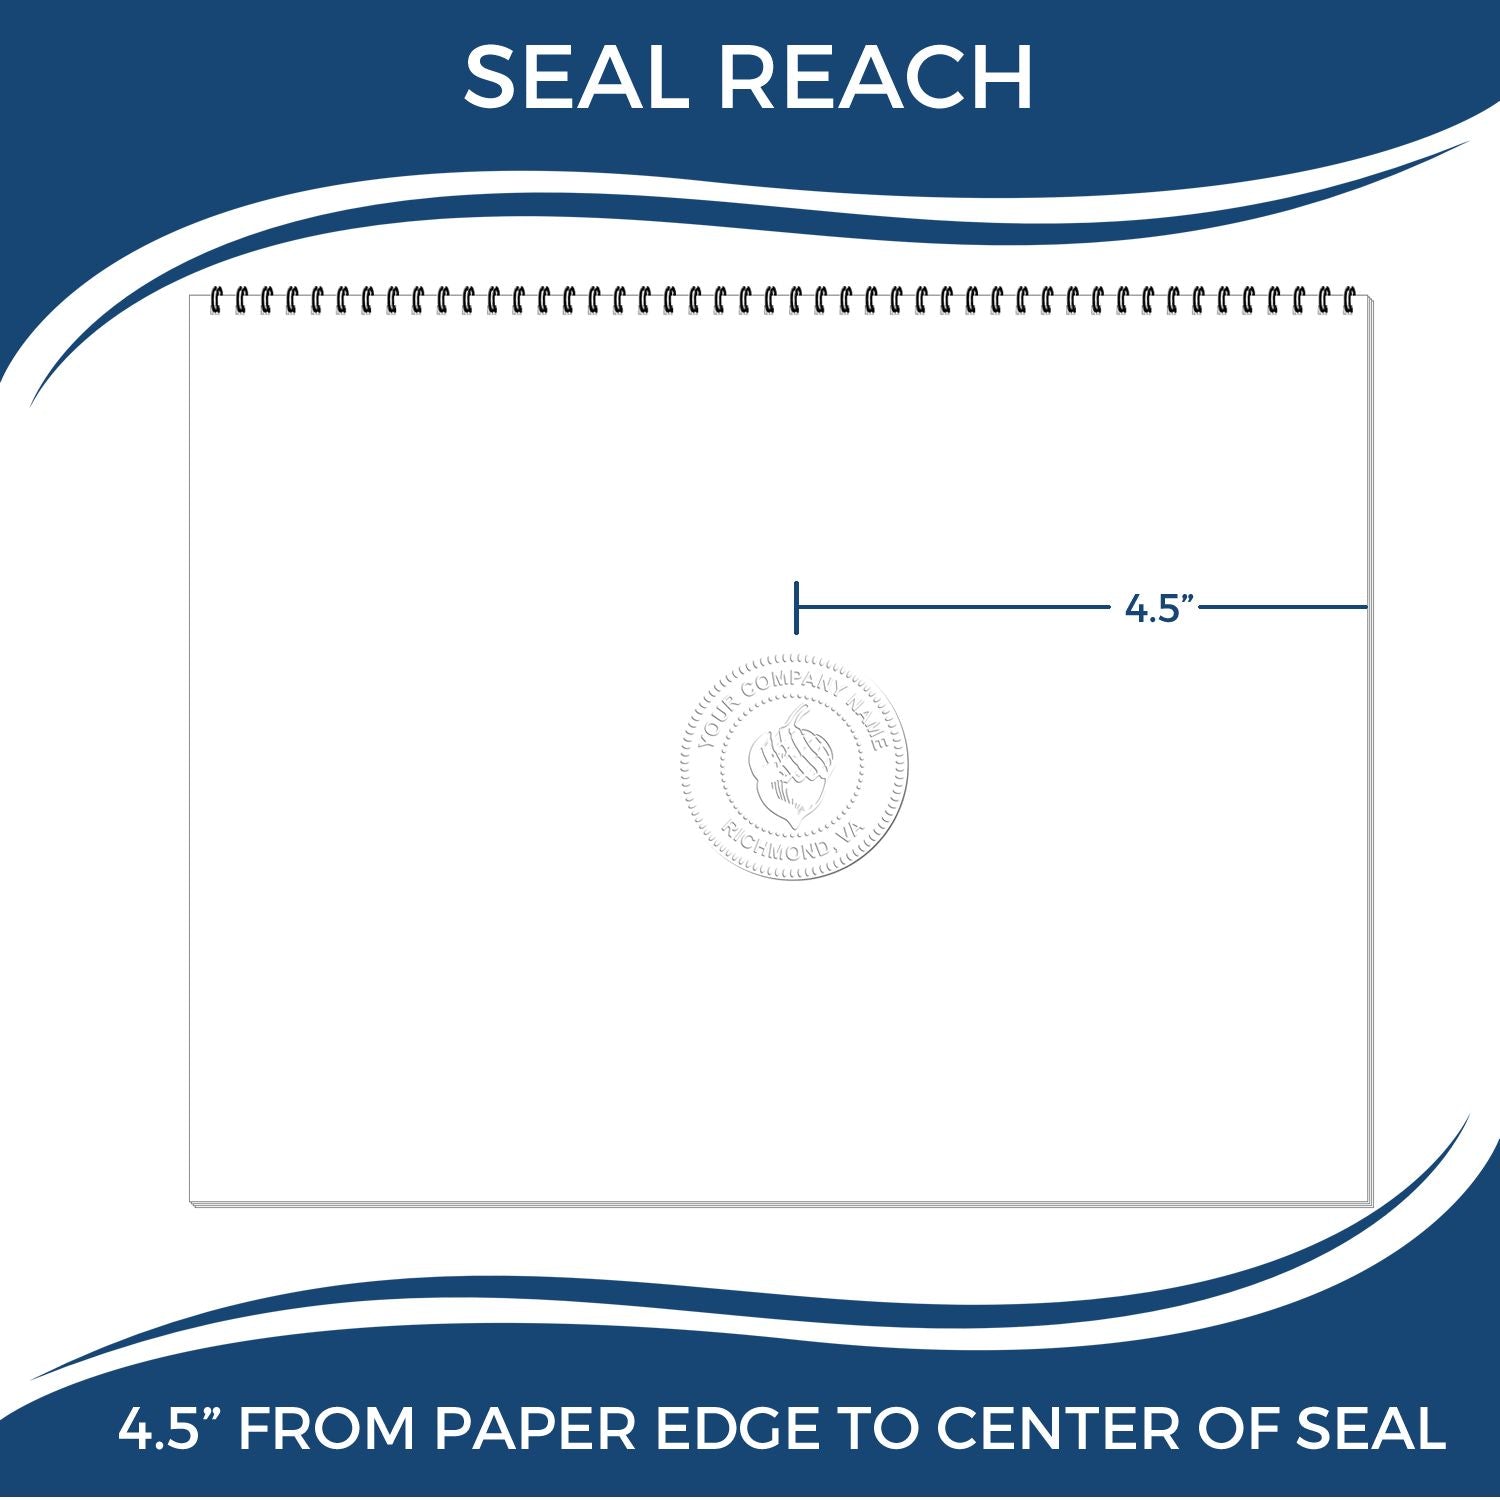 An infographic showing the seal reach which is represented by a ruler and a miniature seal image of the State of Montana Extended Long Reach Engineer Seal